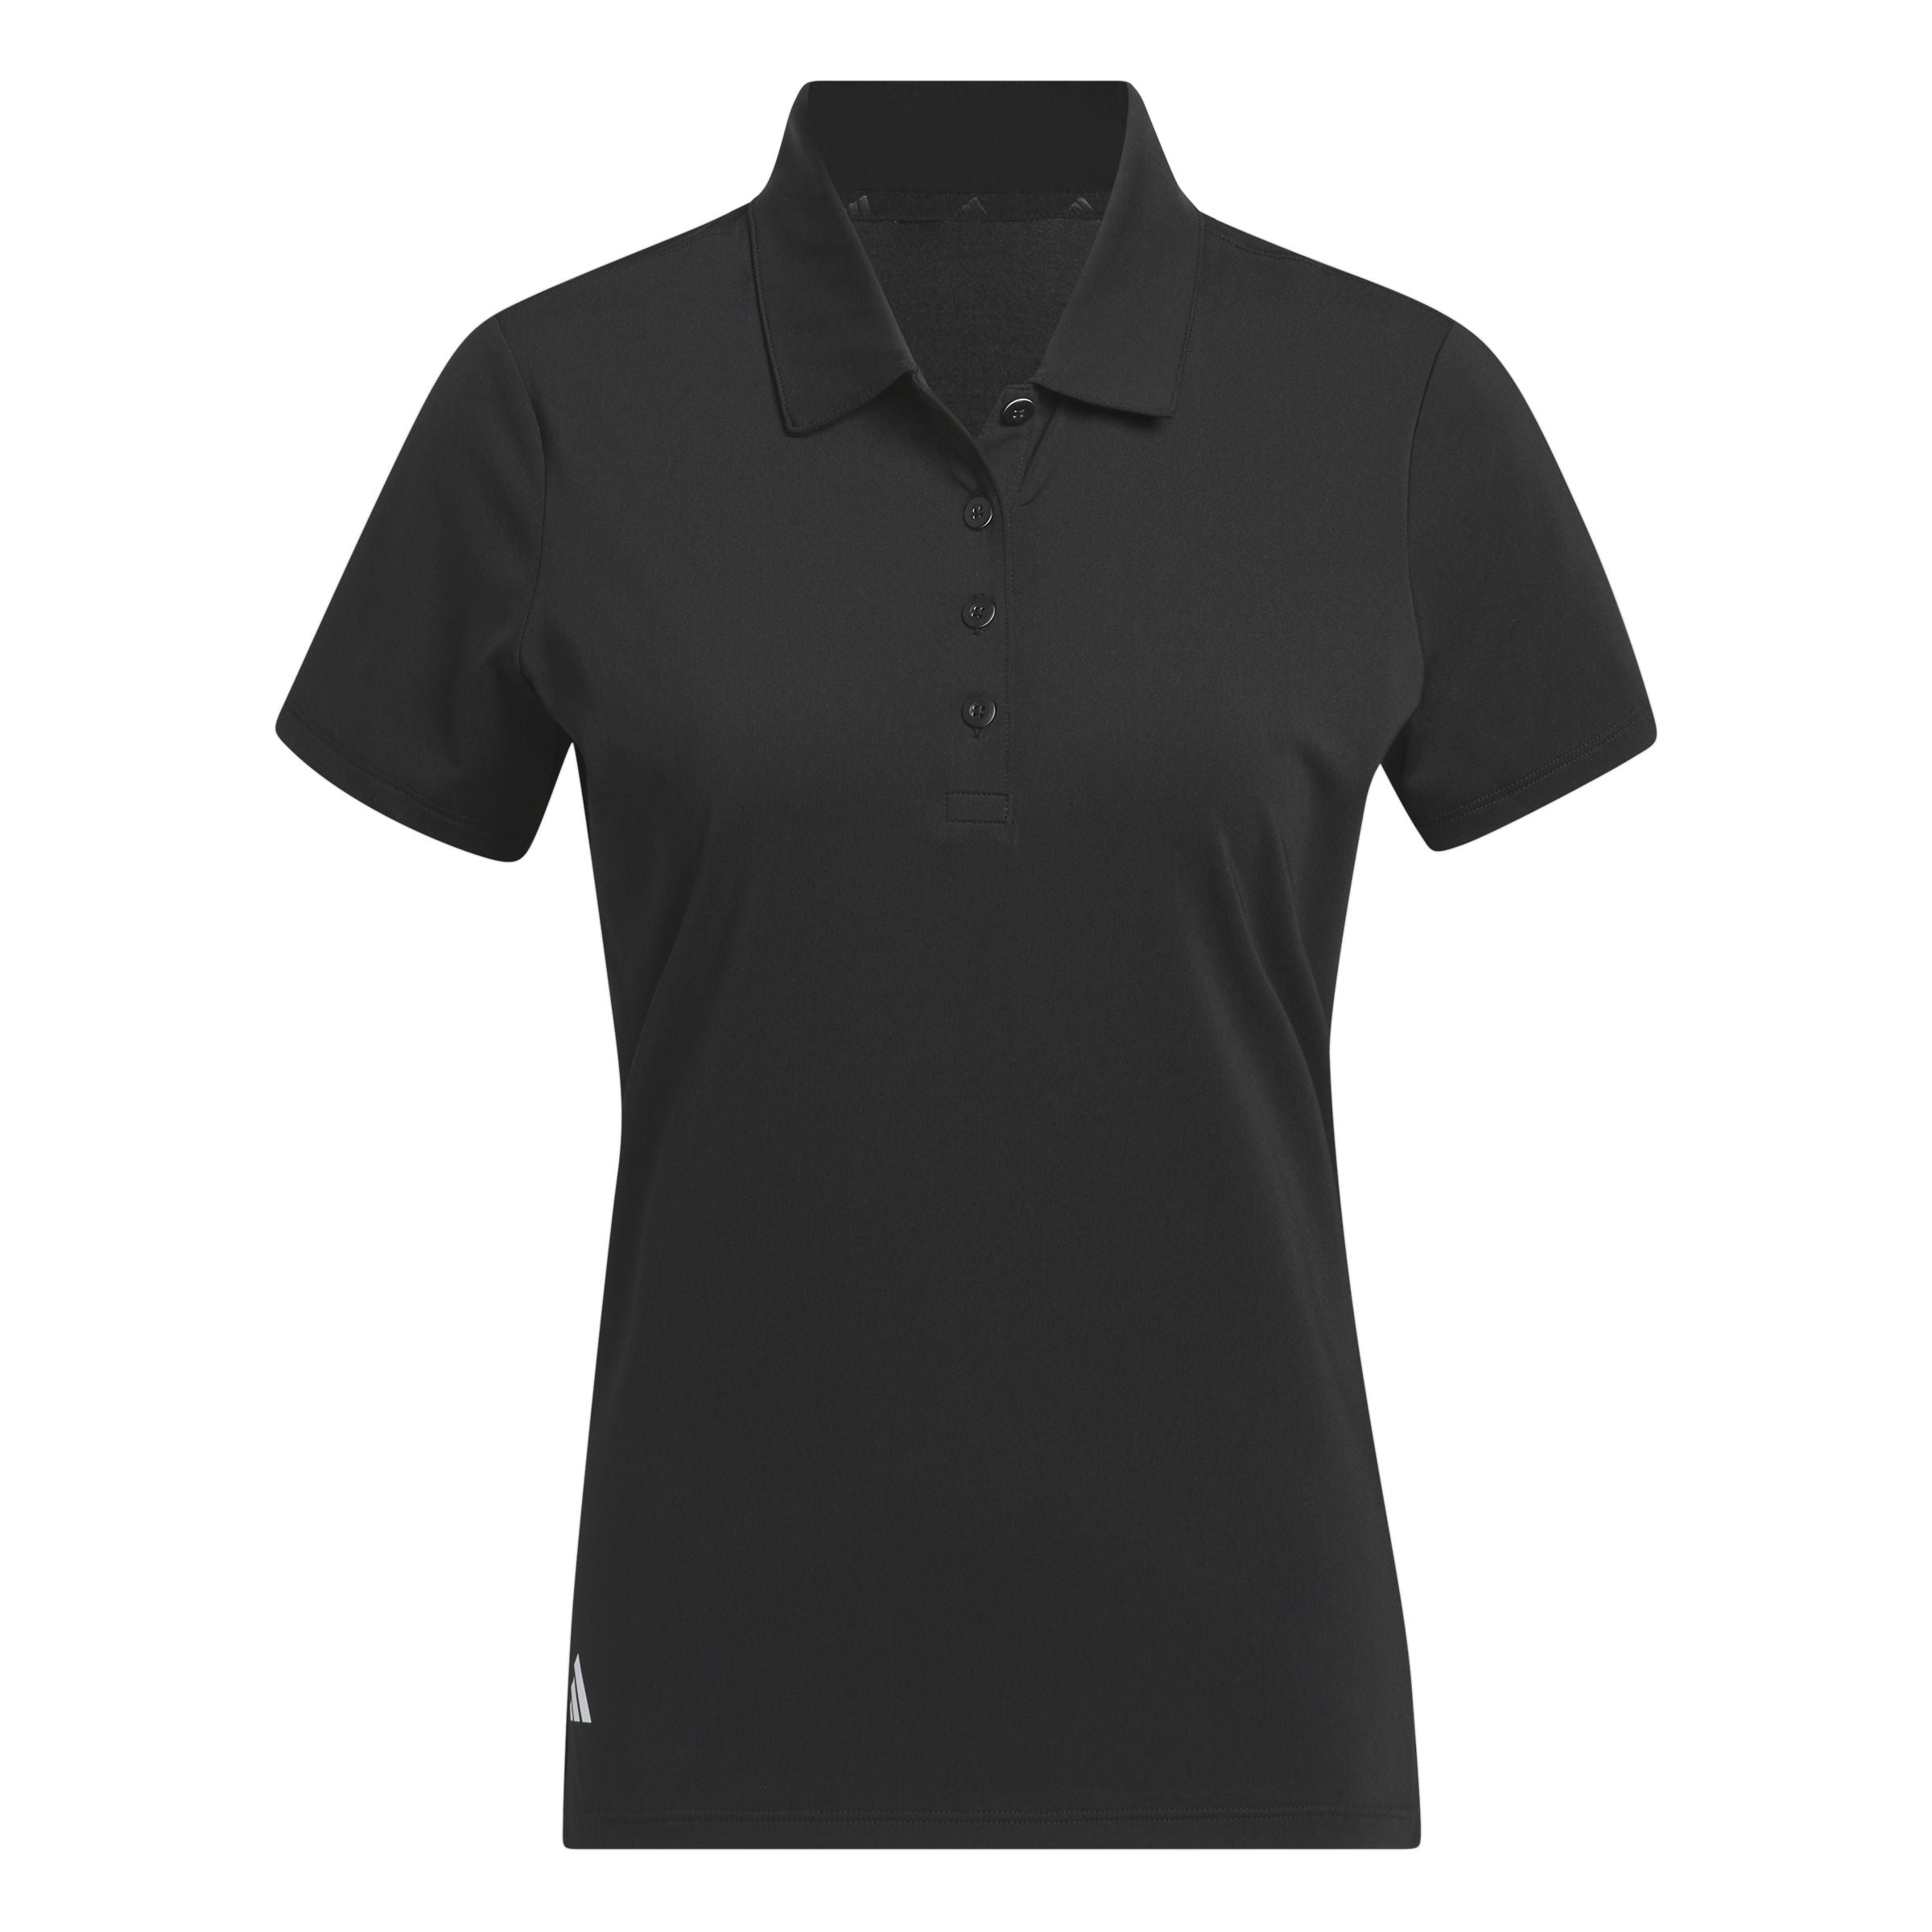 Adidas Women's Ultimate365 Solid Short Sleeve Polo